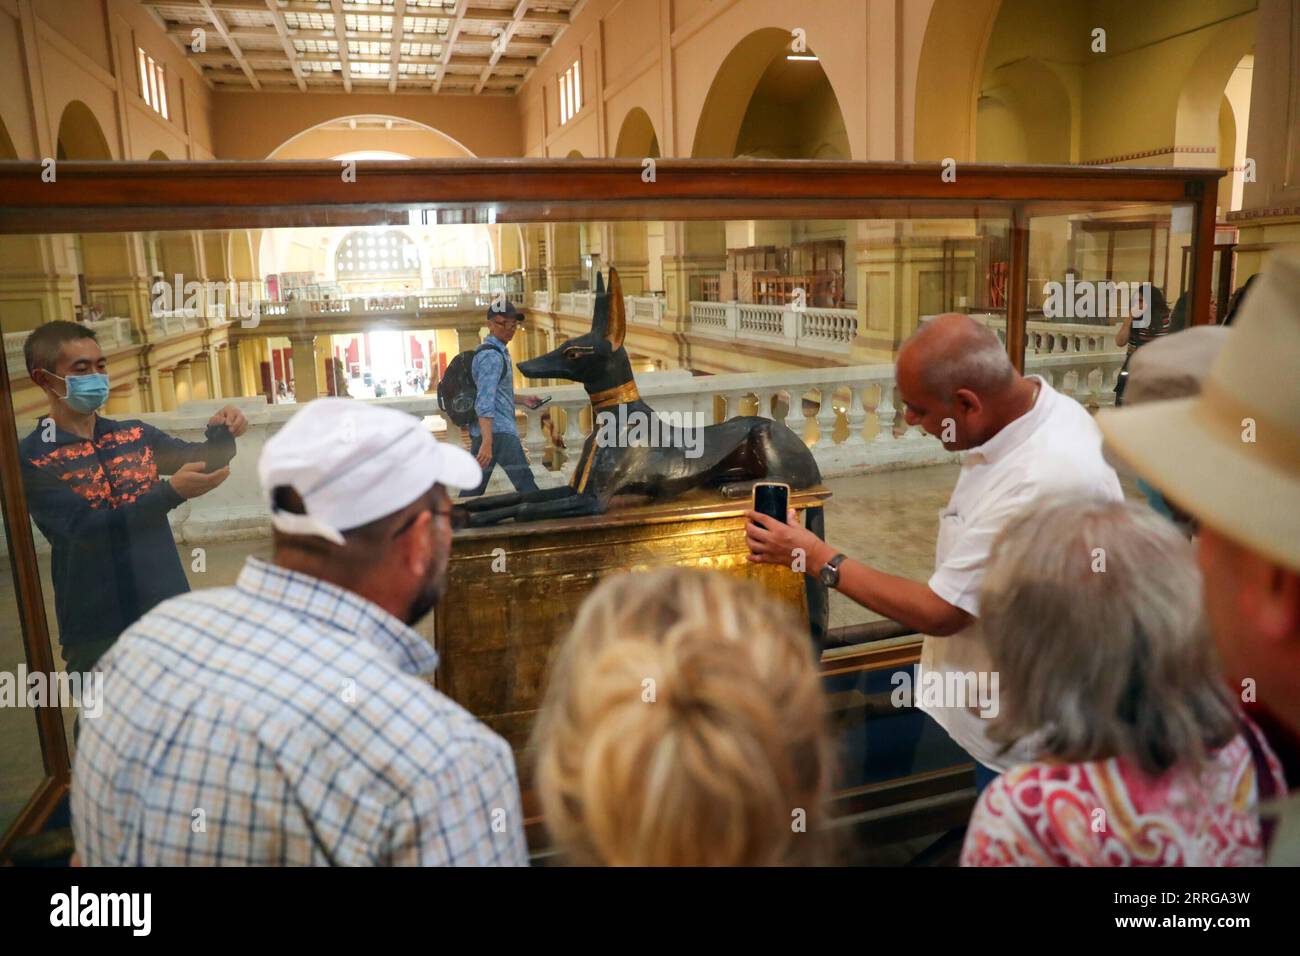 220515 -- CAIRO, May 15, 2022 -- Tourists view the statue of god Anubis discovered at the tomb of king Tutankhamun, at the Egyptian Museum in Cairo, Egypt, on May 14, 2022. As a funerary deity, Anubis is associated with mummification, funerary rituals, and the cemetery in ancient Egyptian myth, usually depicted as a black canine, or a man with canine head. It can be found at large numbers of pharaonic antiquities at the world-known Egyptian Museum.  EGYPT-CAIRO-EGYPTIAN MUSEUM-ANUBIS SuixXiankai PUBLICATIONxNOTxINxCHN Stock Photo